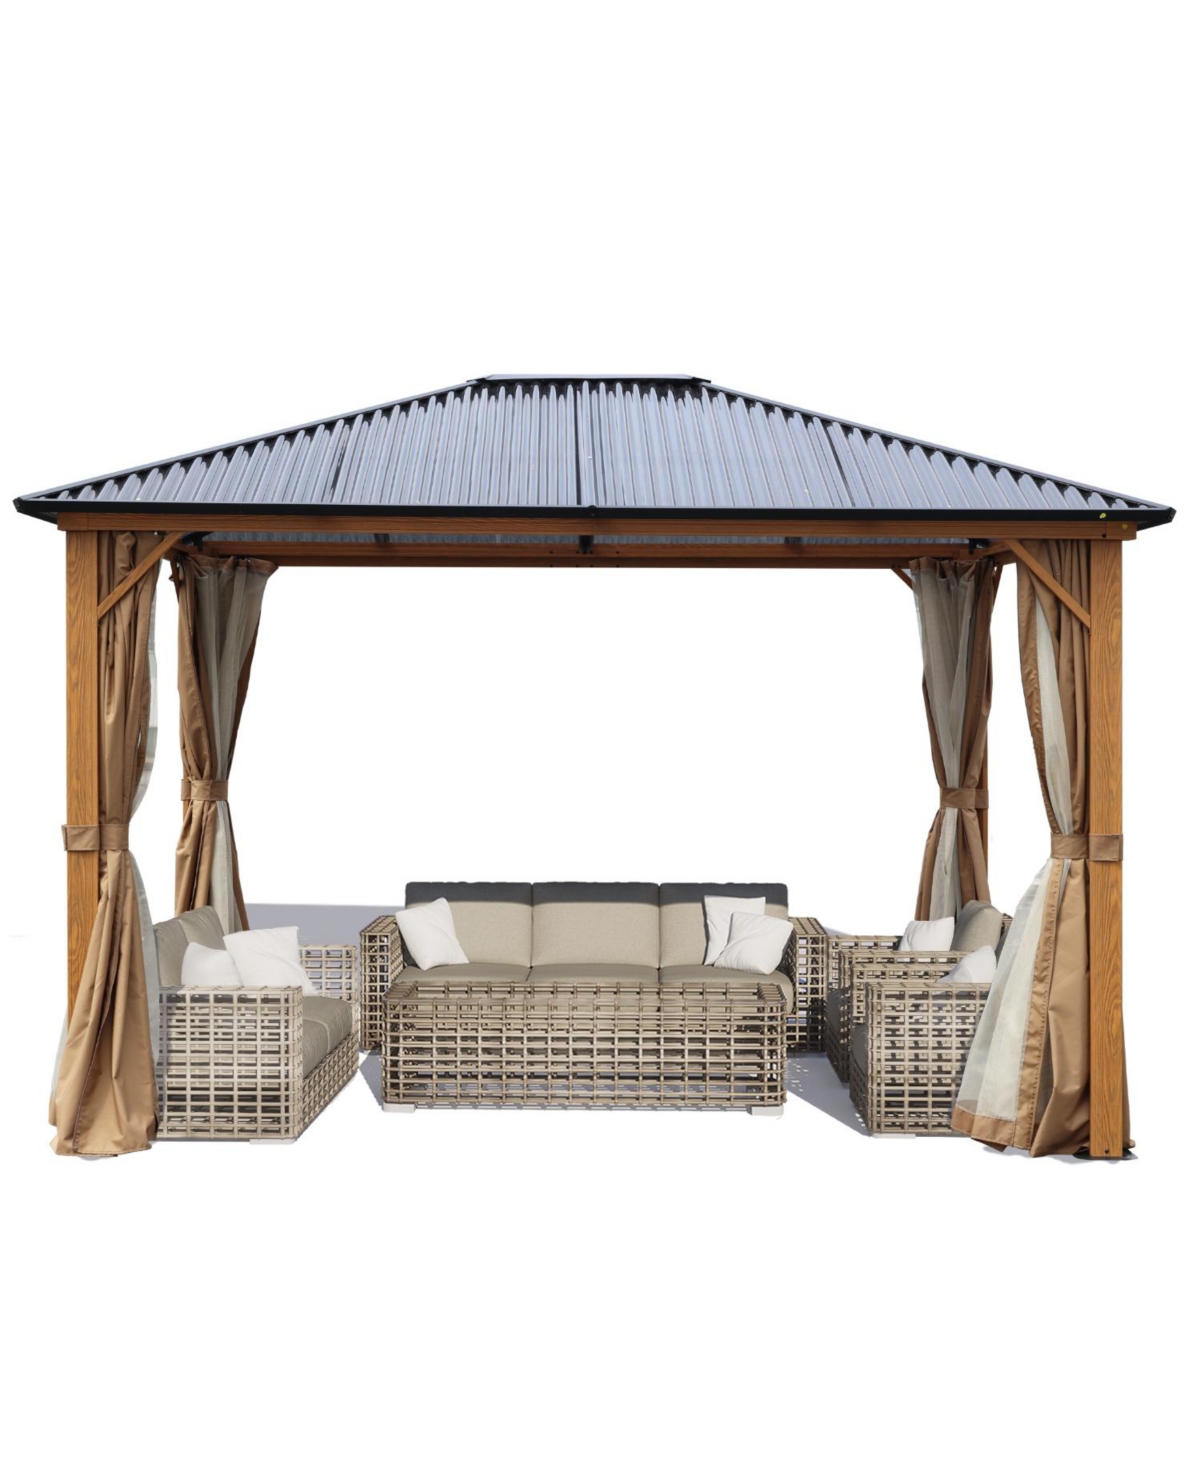 12ftx9.7ftx8.3ft. Wooden Finish Coated Aluminum Frame Gazebo with Polycarbonate Roof, Outdoor Gazebos with Curtains and Nettings, for Patio Bac